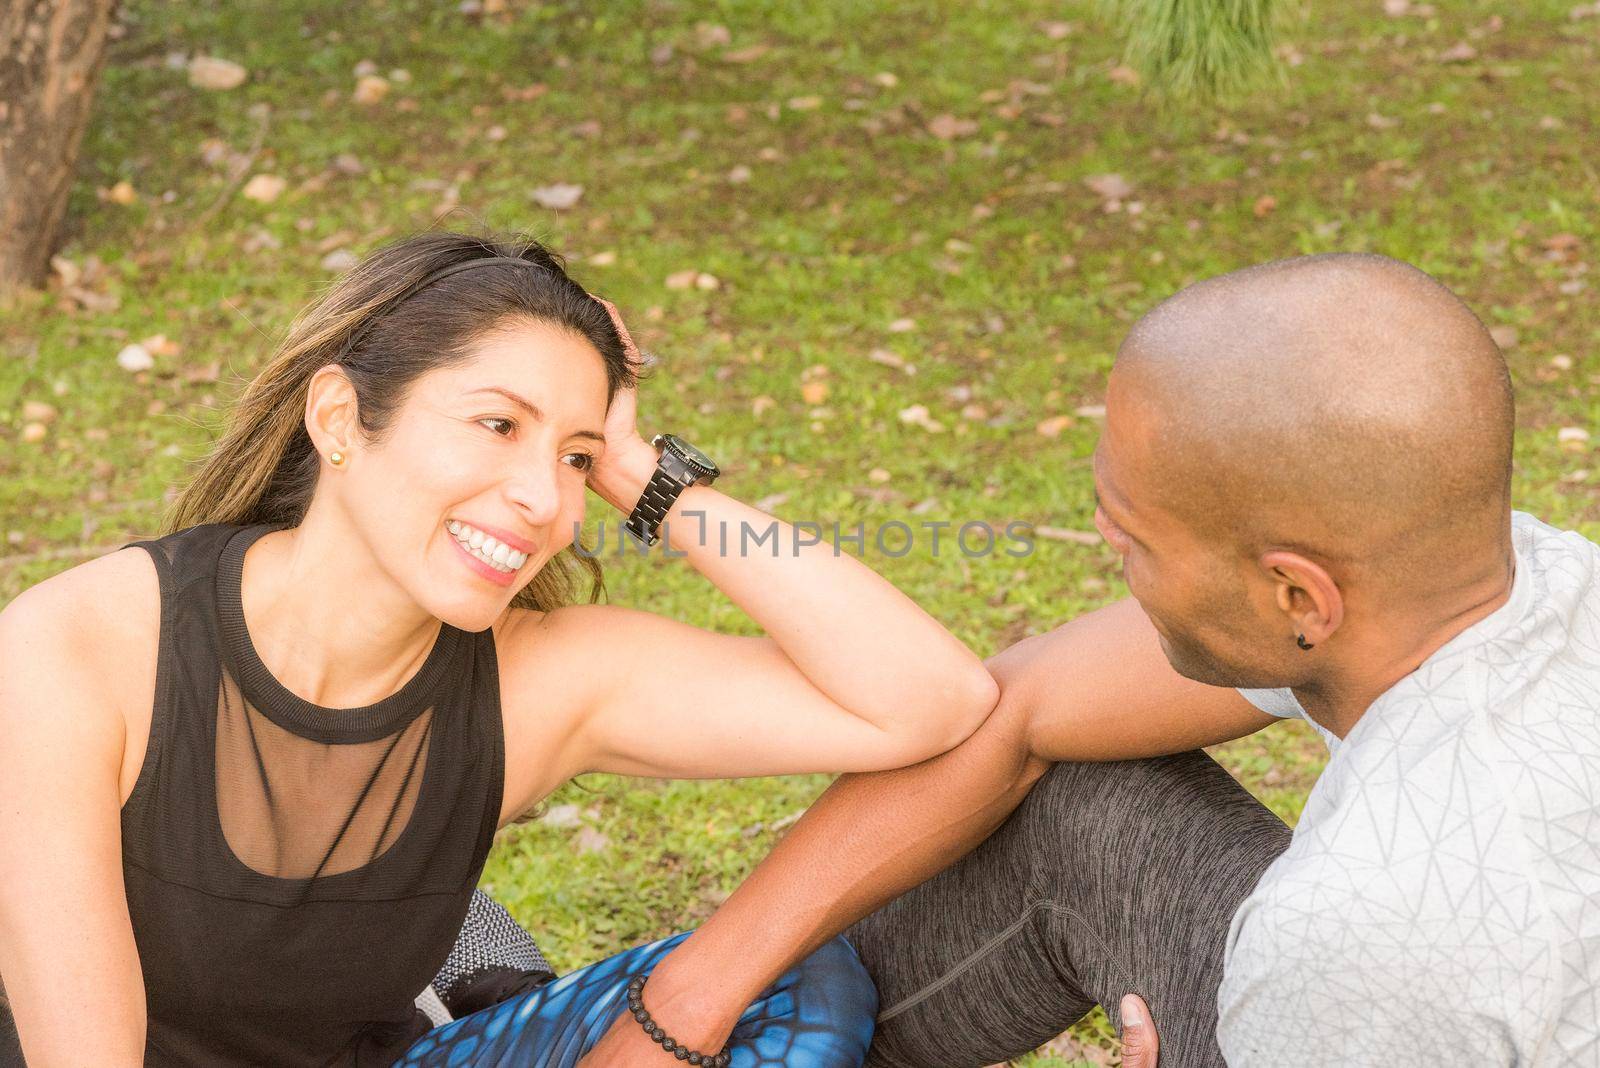 Sportswoman taking a break with her sportsboyfriend after a strenuous workout. Multi-ethnic couple exercising outdoors.